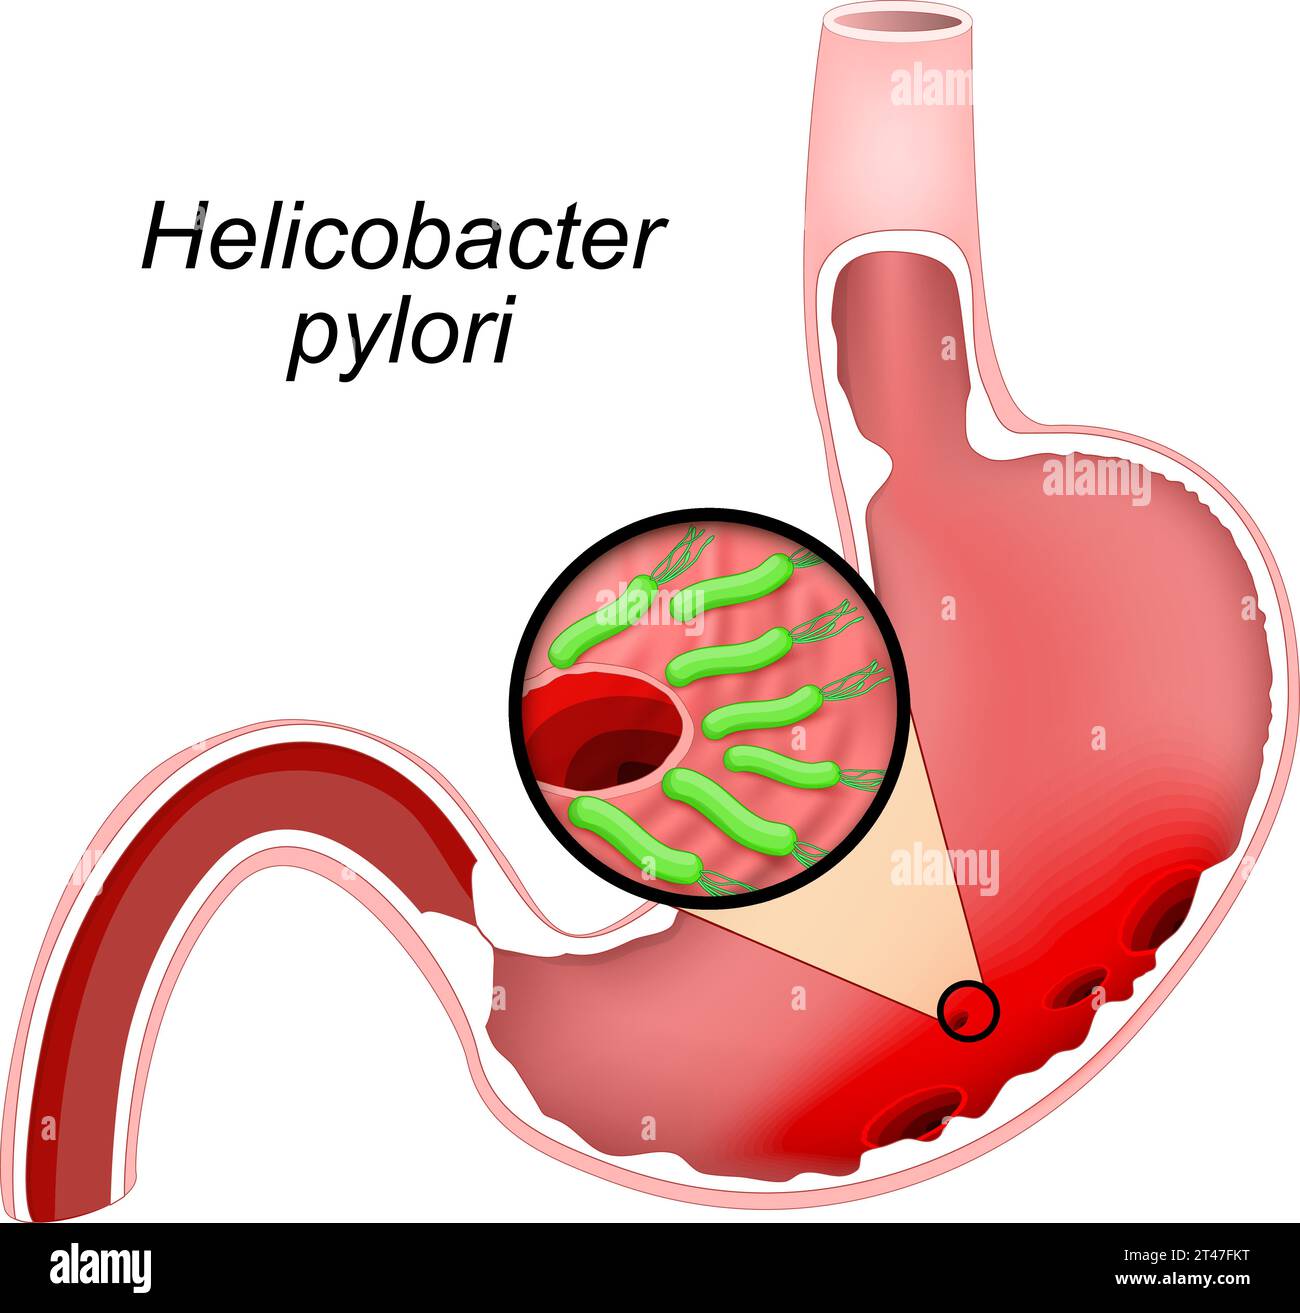 Cross section of a human Stomach with ulcers. Close-up of bacteria Helicobacter pylori that caused Gastric ulcers. Peptic ulcers. Vector illustration Stock Vector